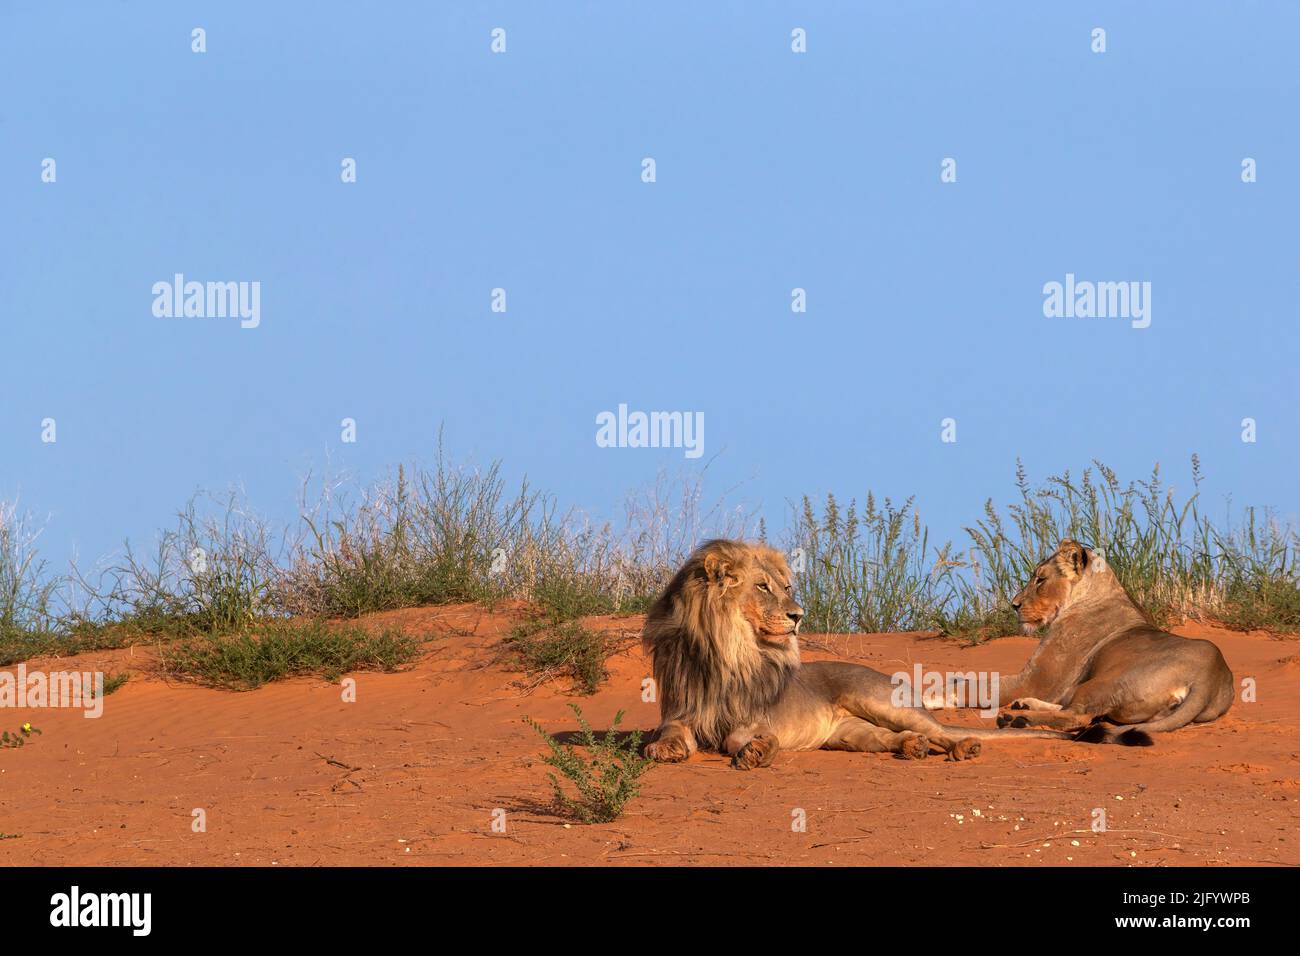 Lion and lioness (Panthera leo), Kgalagadi Transfrontier Park, Northern Cape, South Africa, Africa Stock Photo